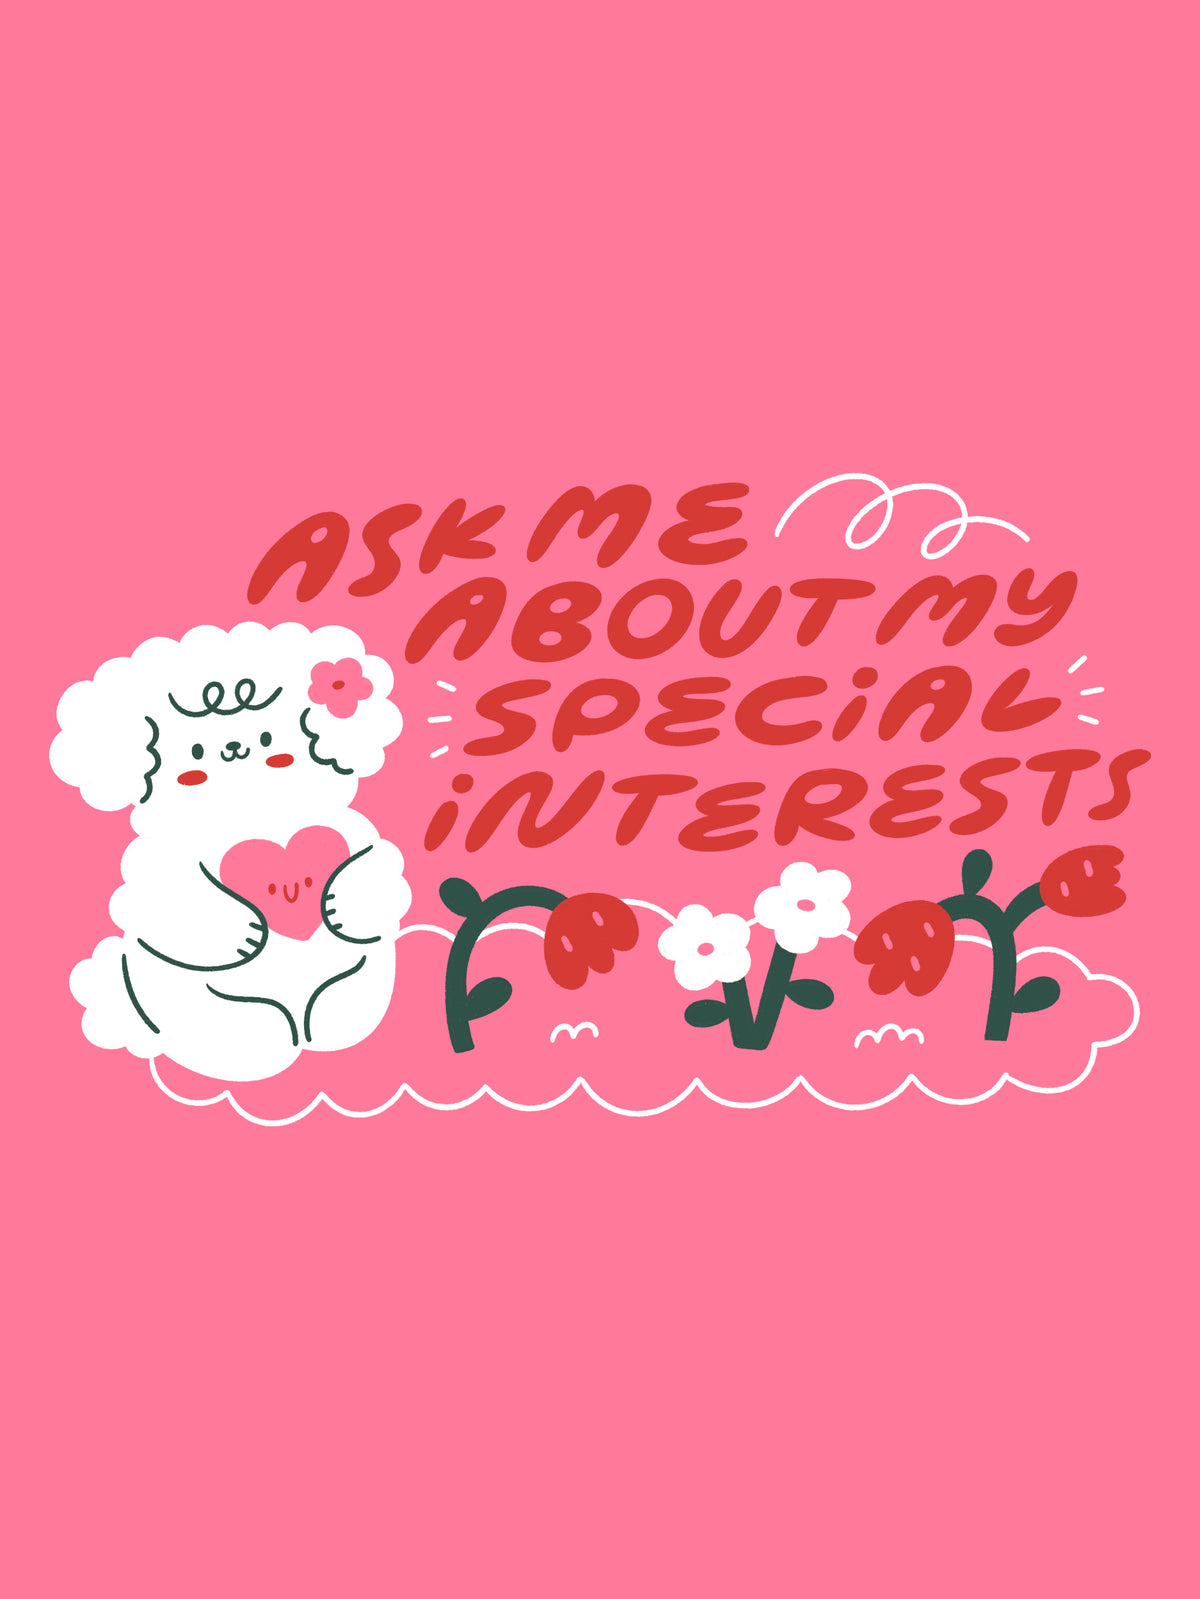 Ask Me About My Special Interests by candy.courn / courtneyahndesign